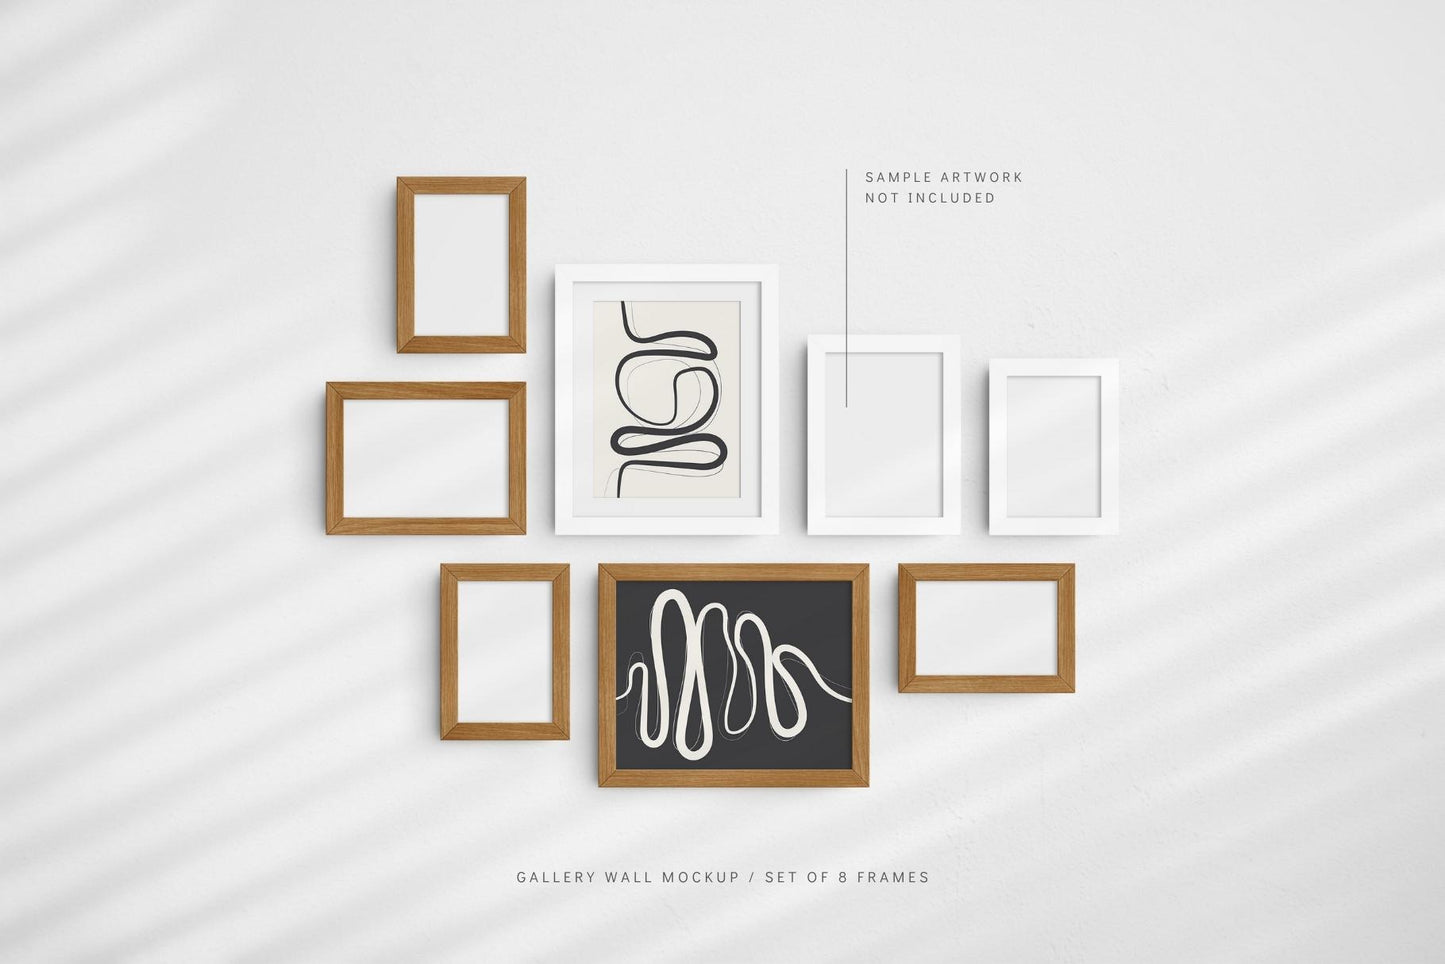 Gallery Wall Mockup | Set of 8 Frames | Frame Mockup | PSD | Editable Frame Colors and Texture